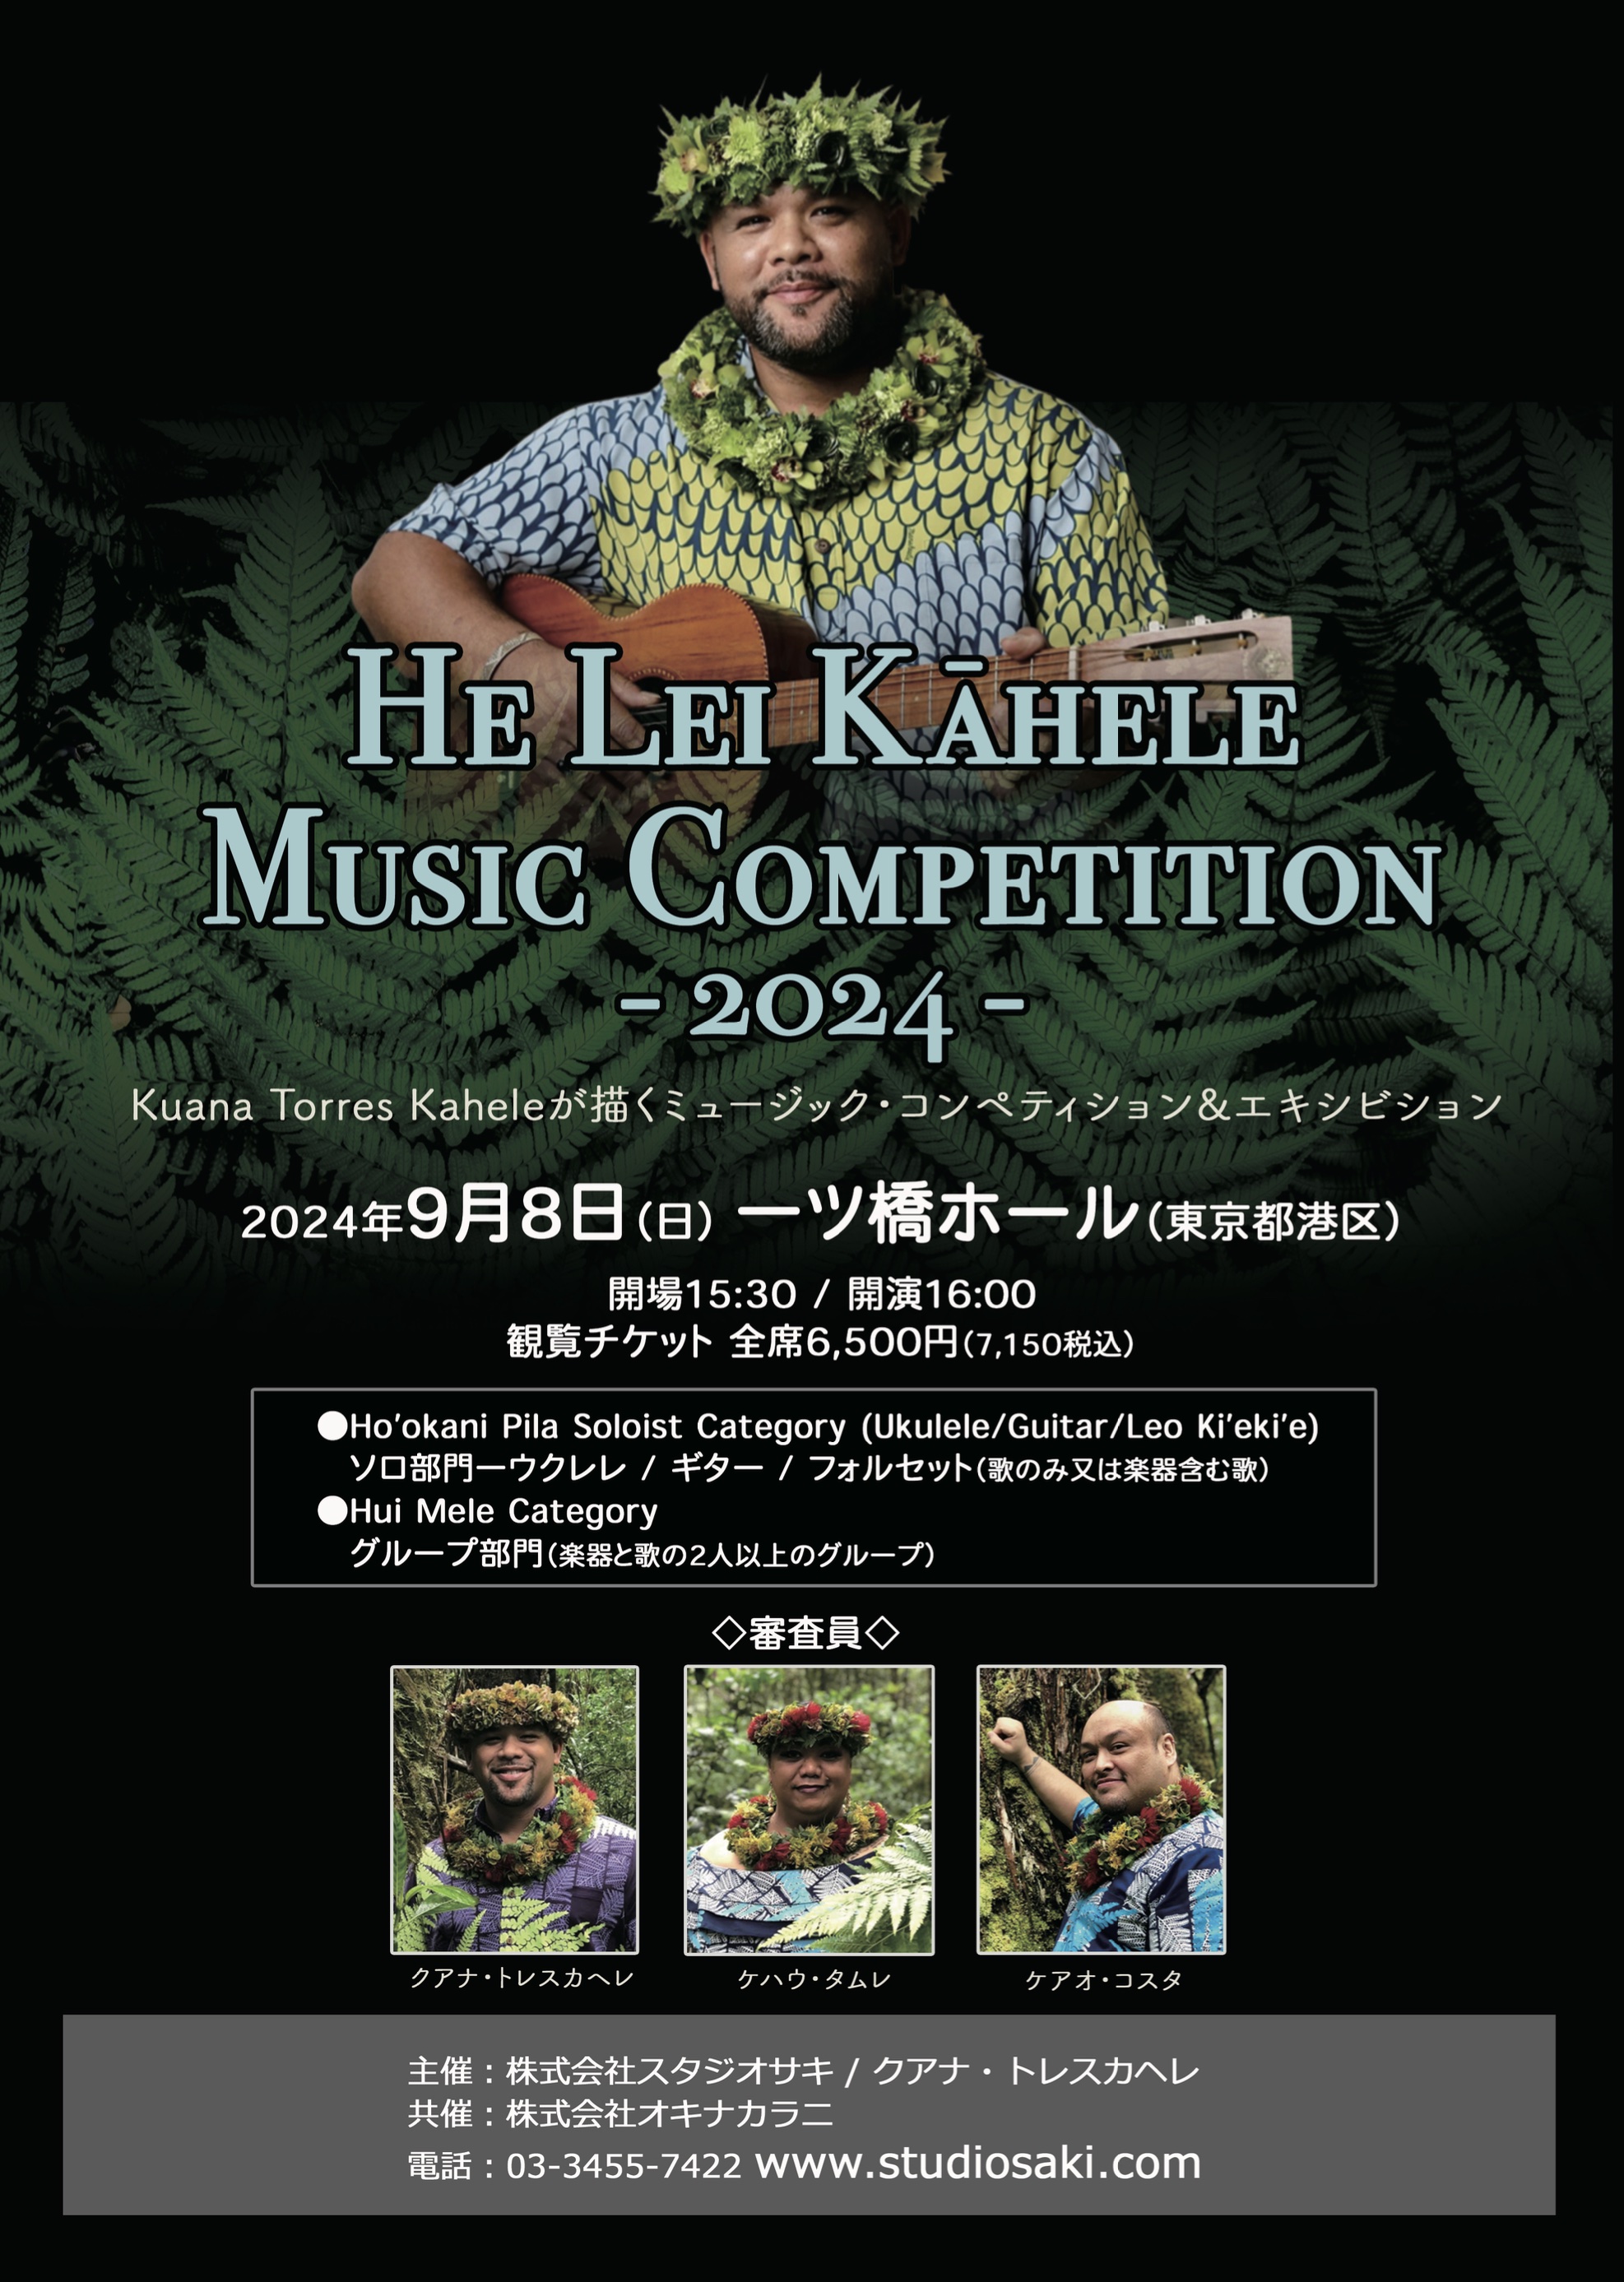 He Lei Kahele Music Competition & Exhibition